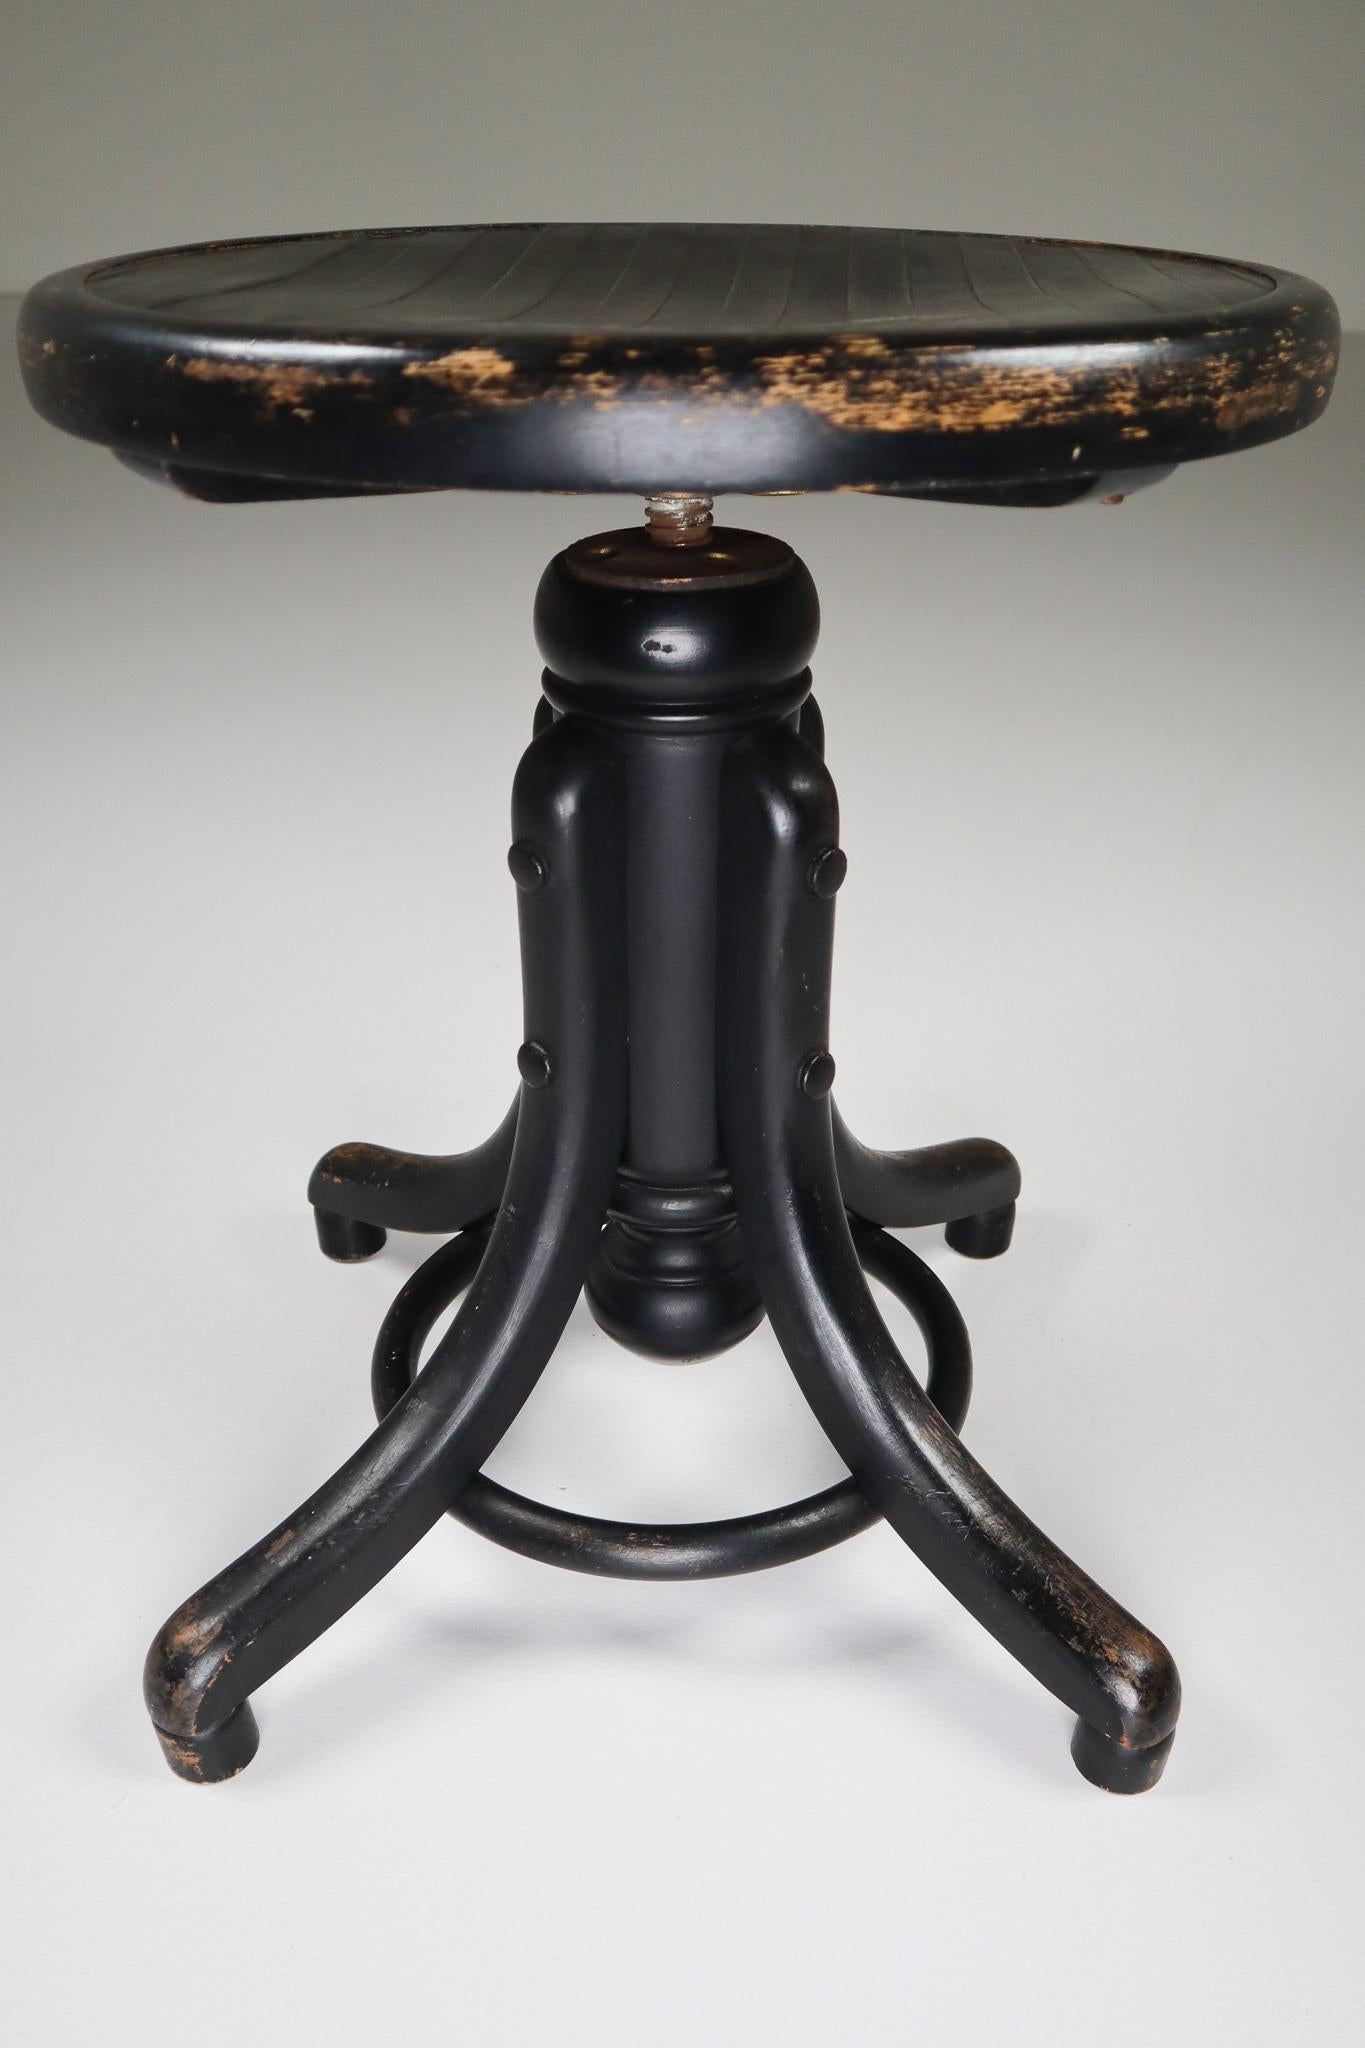 Black patinated adjustable piano stool by Thonet. Bentwood legs with turned wood vertical standard, and wood disk form seat. Seat spins to adjust height (Total H in upper position 66 inch x 44 cm lower position). Originally designed as piano stool,